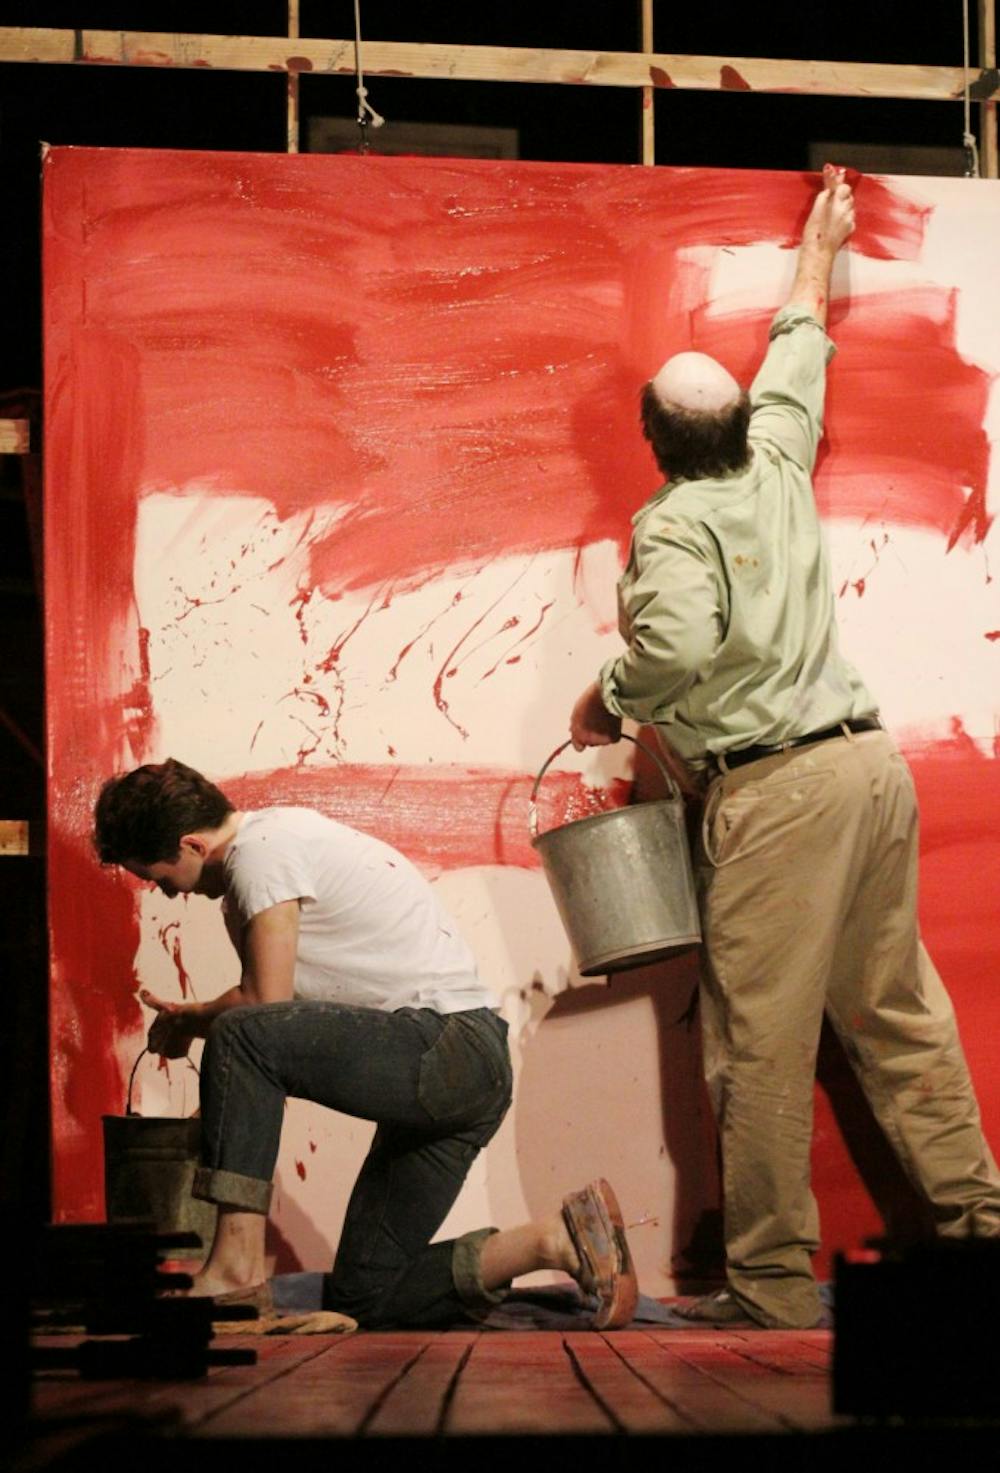 RED-- STEPHEN CAFFREY (bald/old) as Rothko and MATT GARNER (young) as Ken in they PlayMakers Repertory Company's production of "Red"  by John Logan.